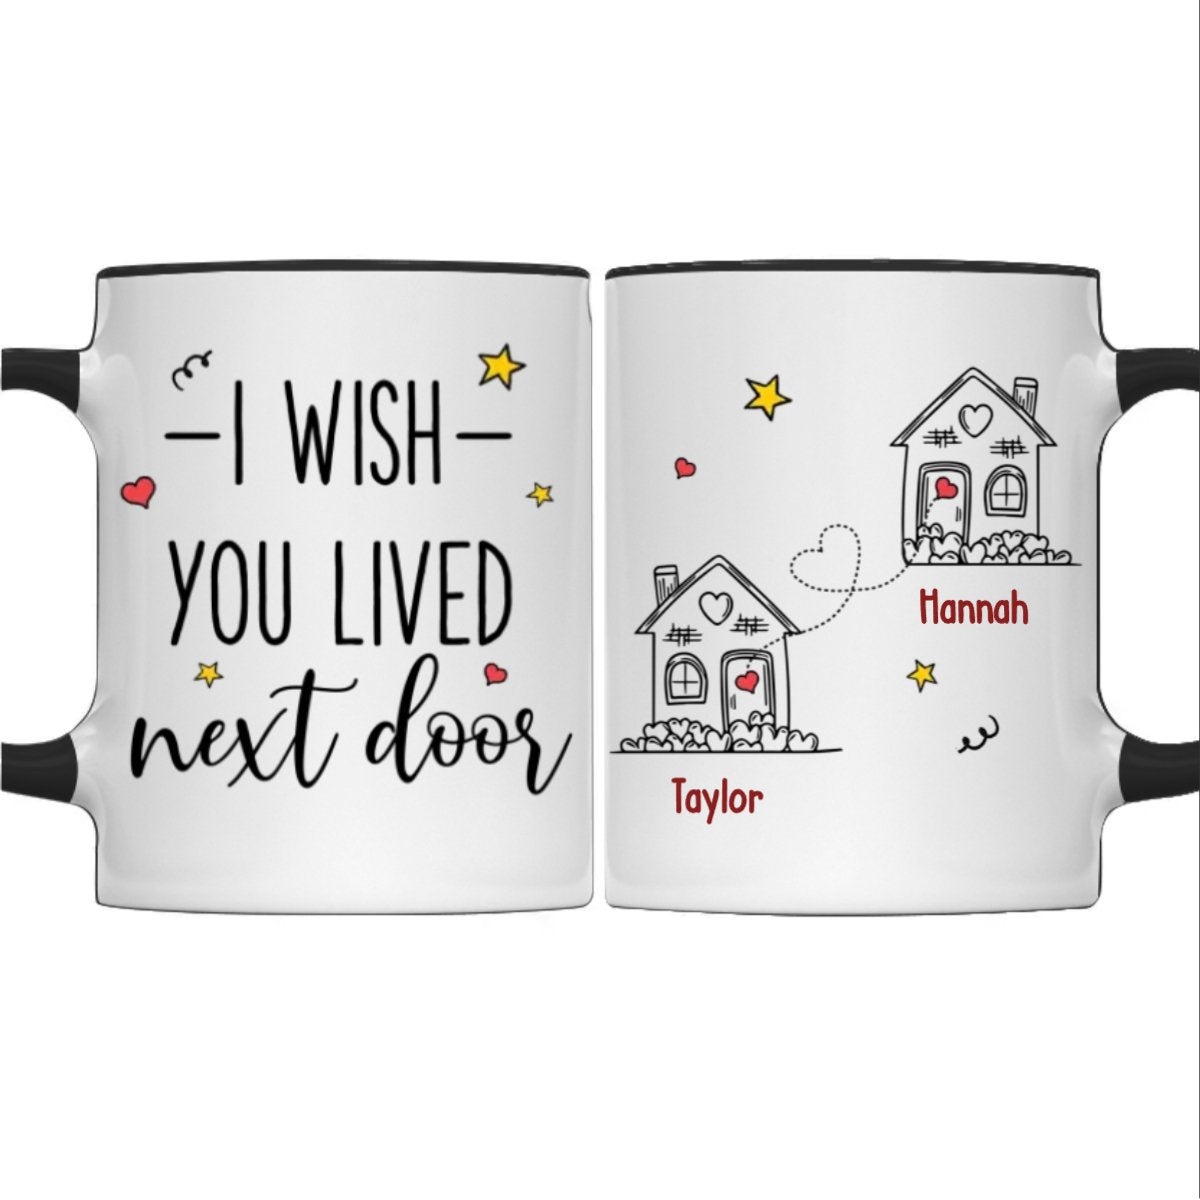 Besties - I Wish We Lived Closer - Personalized Accent Mug - The Next Custom Gift